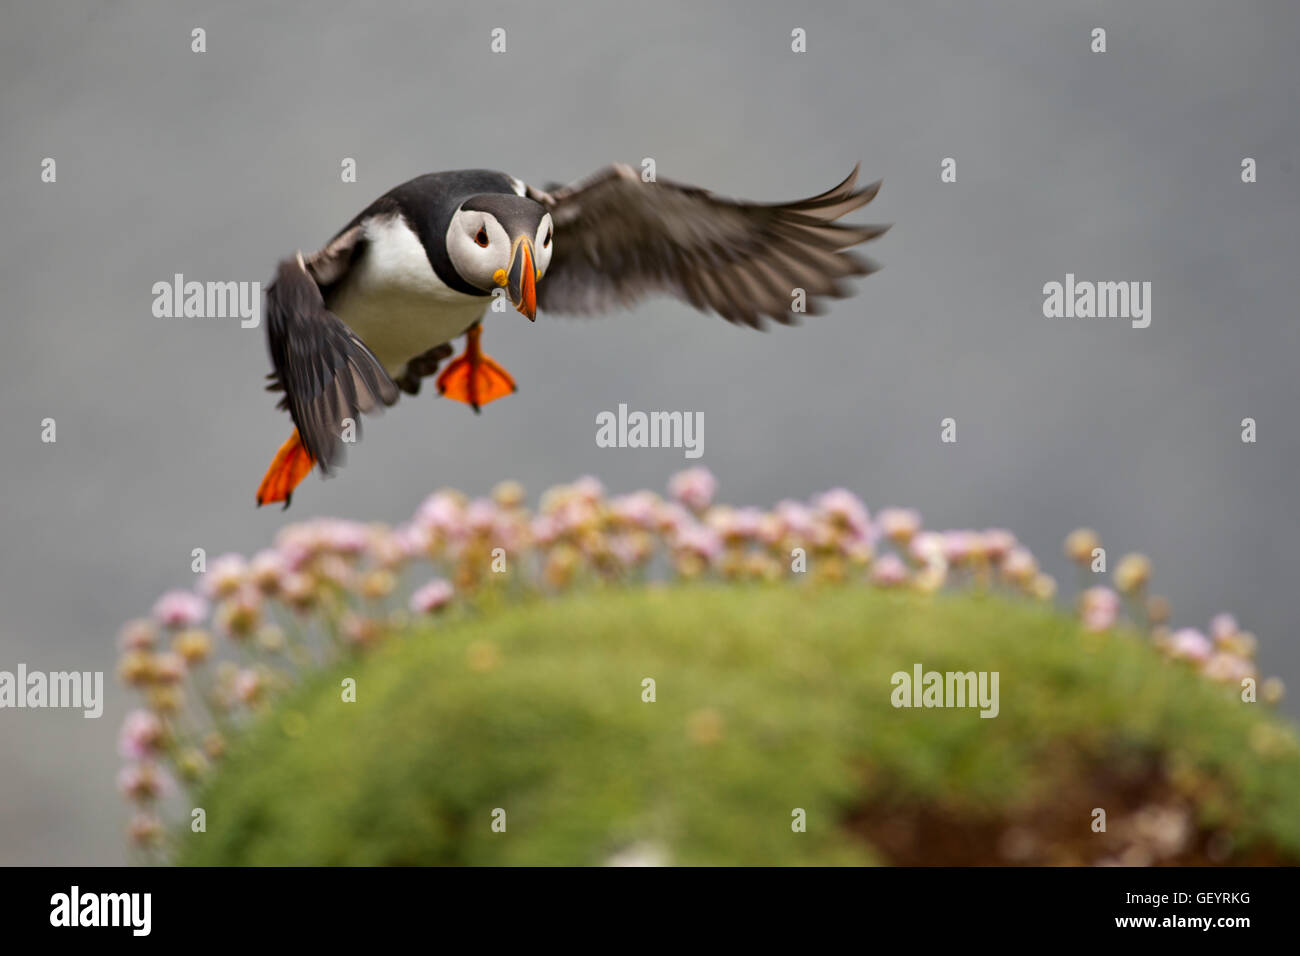 Puffin flying in Landing Stock Photo